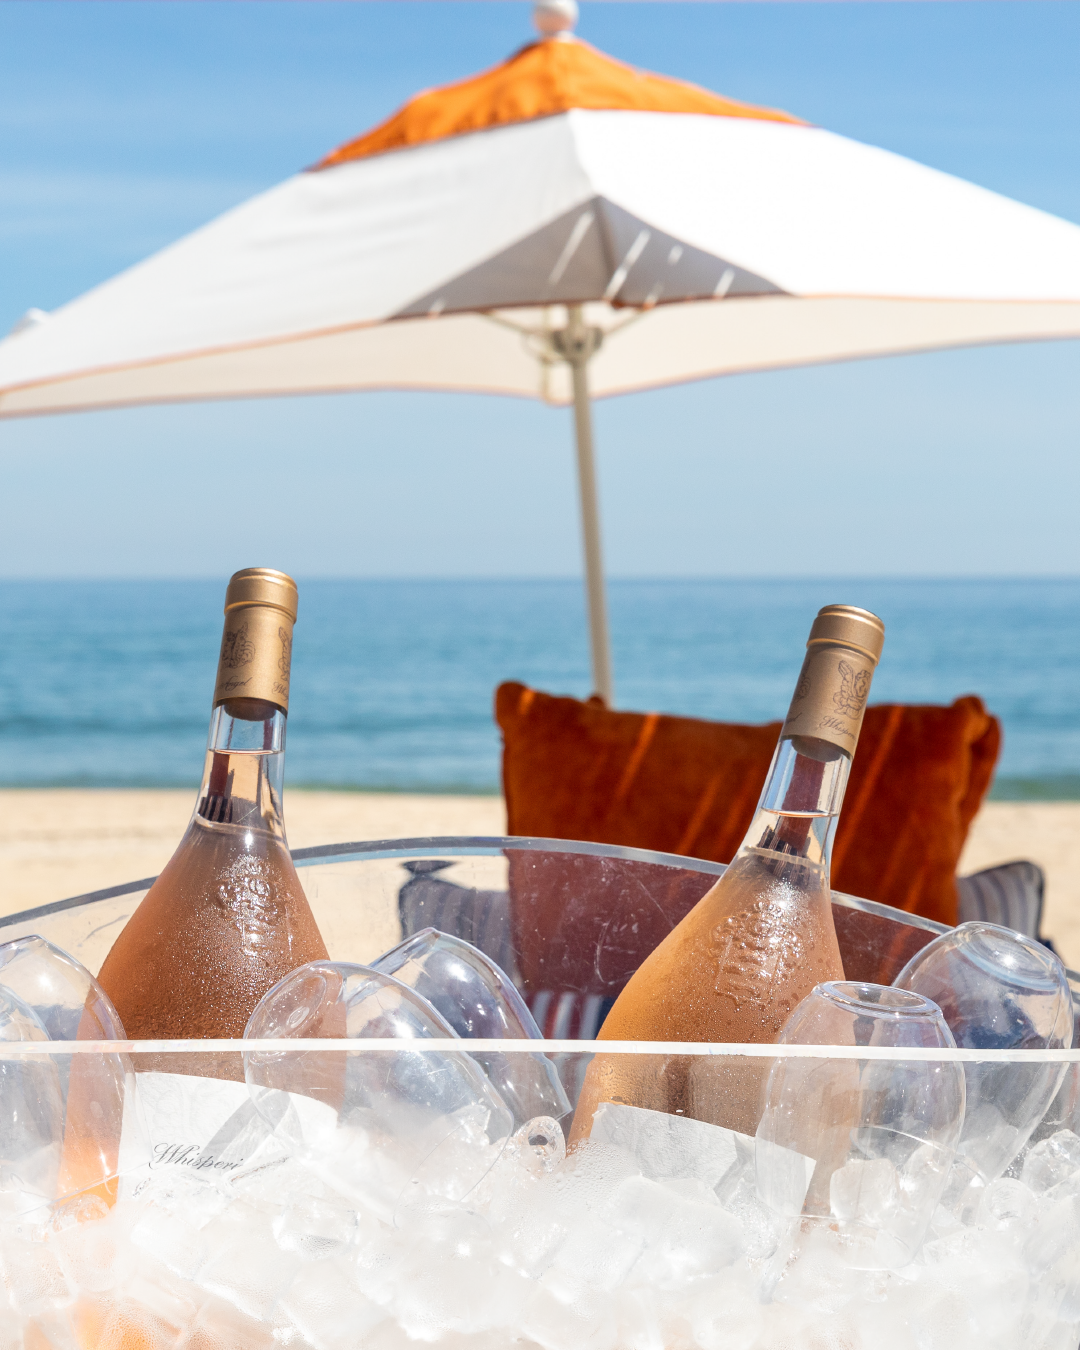 Two bottles of wine set against an umbrella and an ocean backdrop